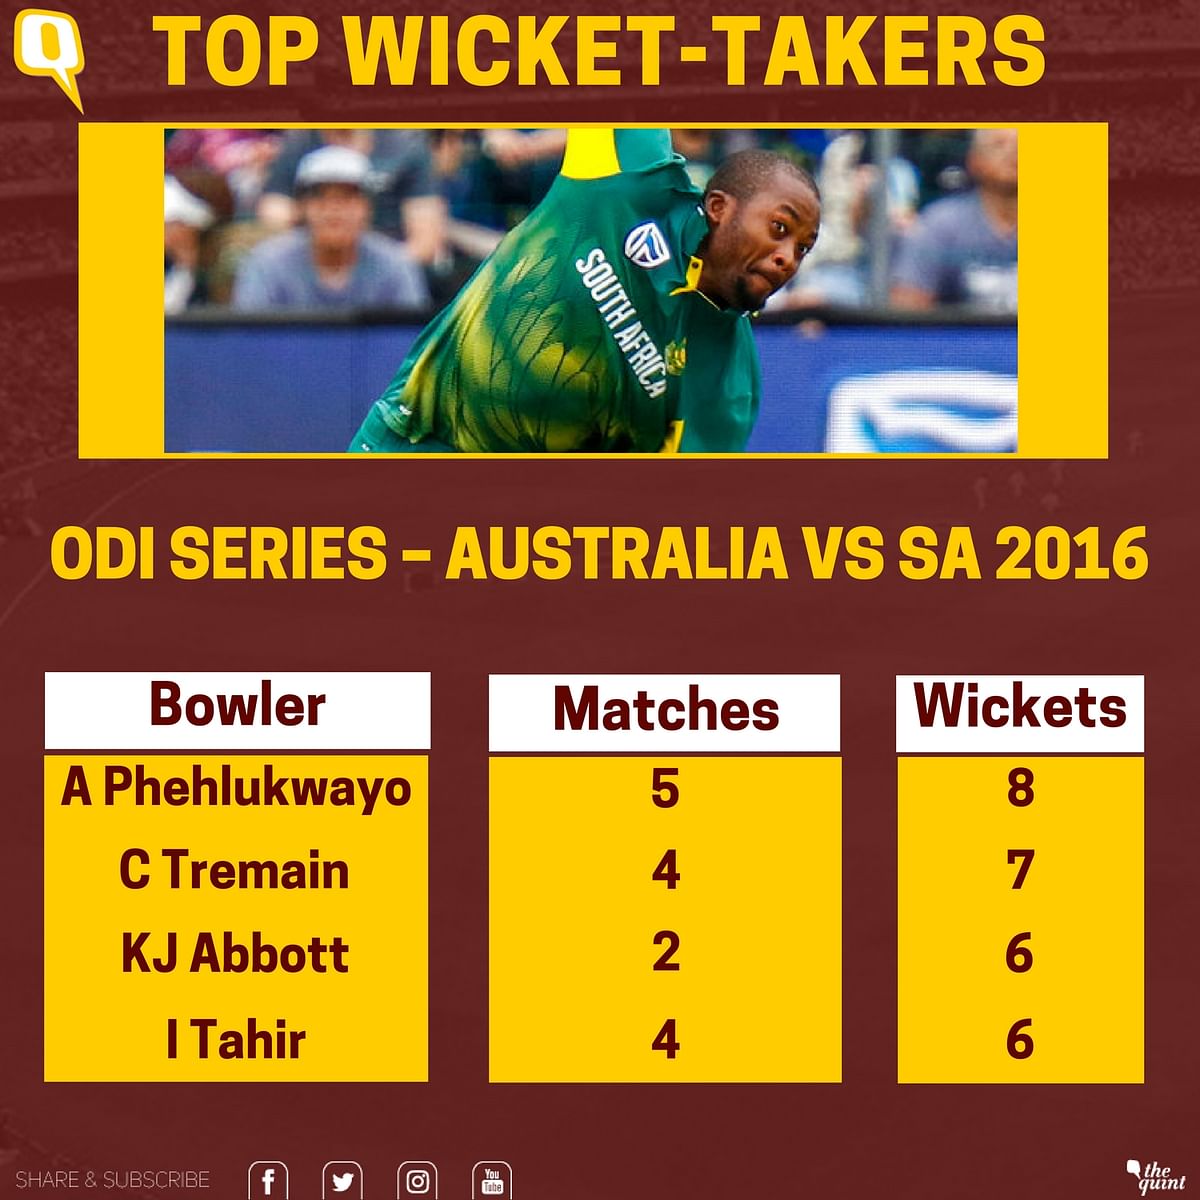 Here’s a look at how the spinners have made more and more impact as ODI series have been played in South Africa.